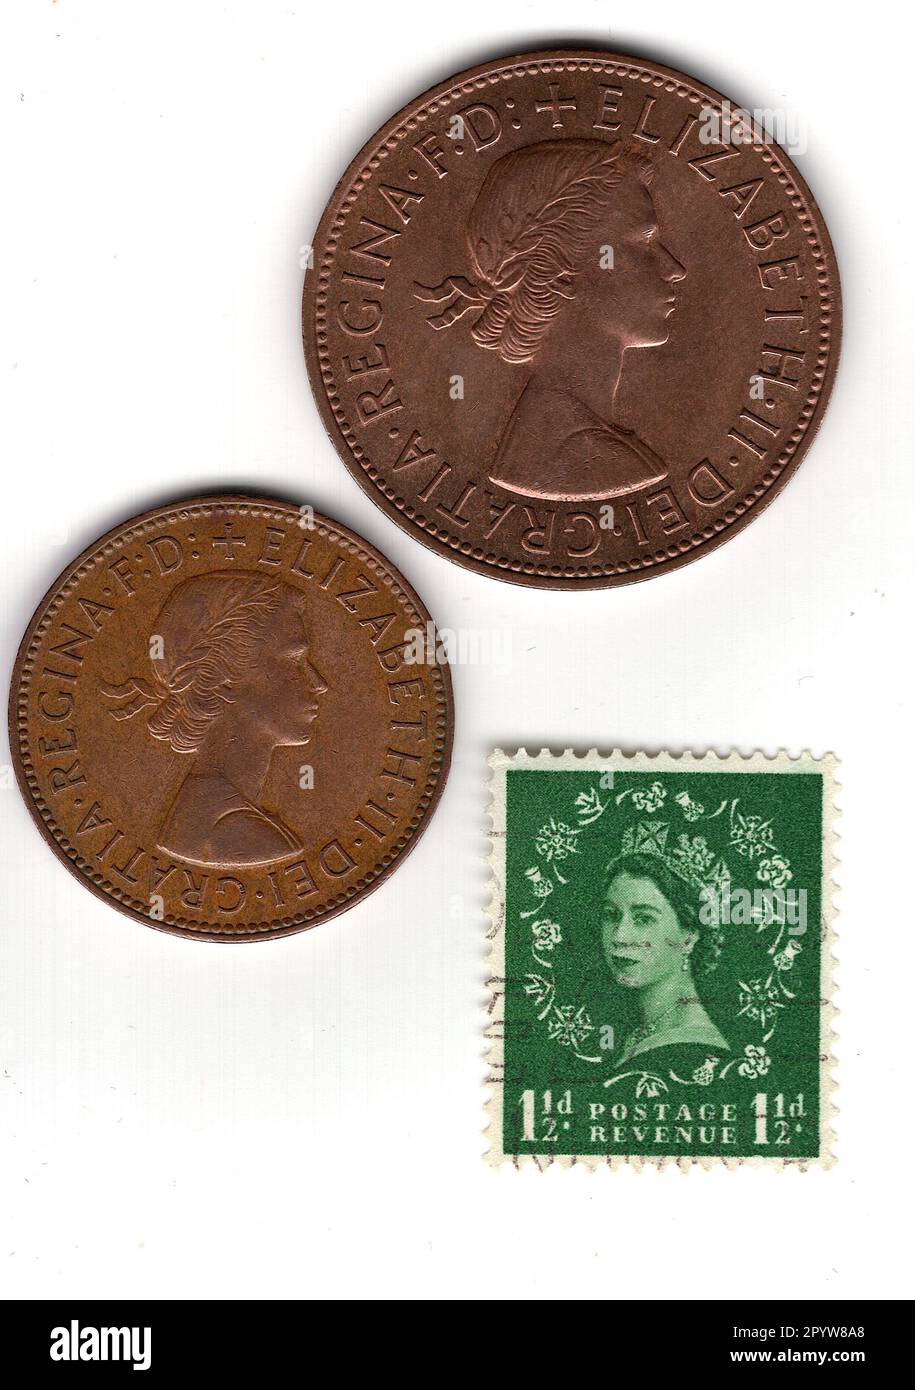 One and a half penny coins and stamp from the reign of Queen Elizabeth II isolated on a white background. Stock Photo